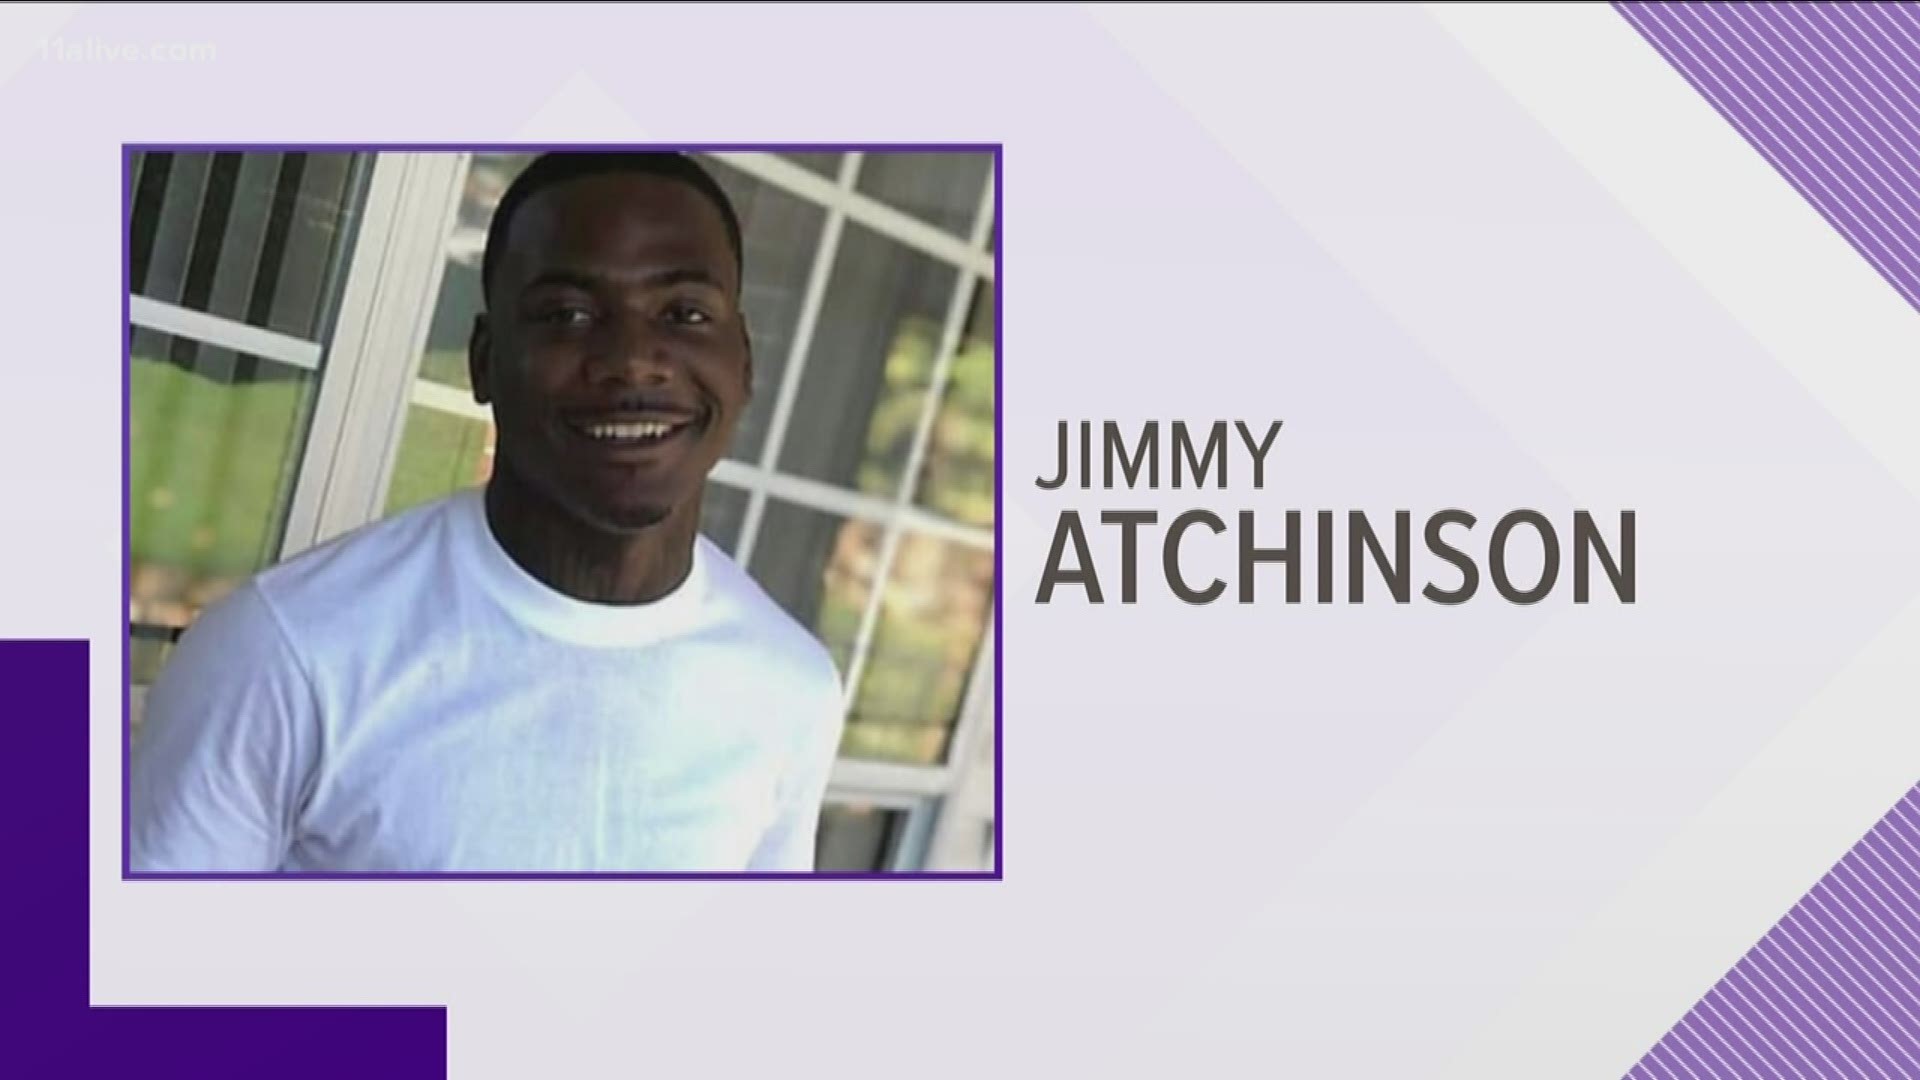 Jimmy Atchison, 21, was hiding in a closet when he was shot by an Atlanta police officer during an altercation at an apartment complex, his family said.